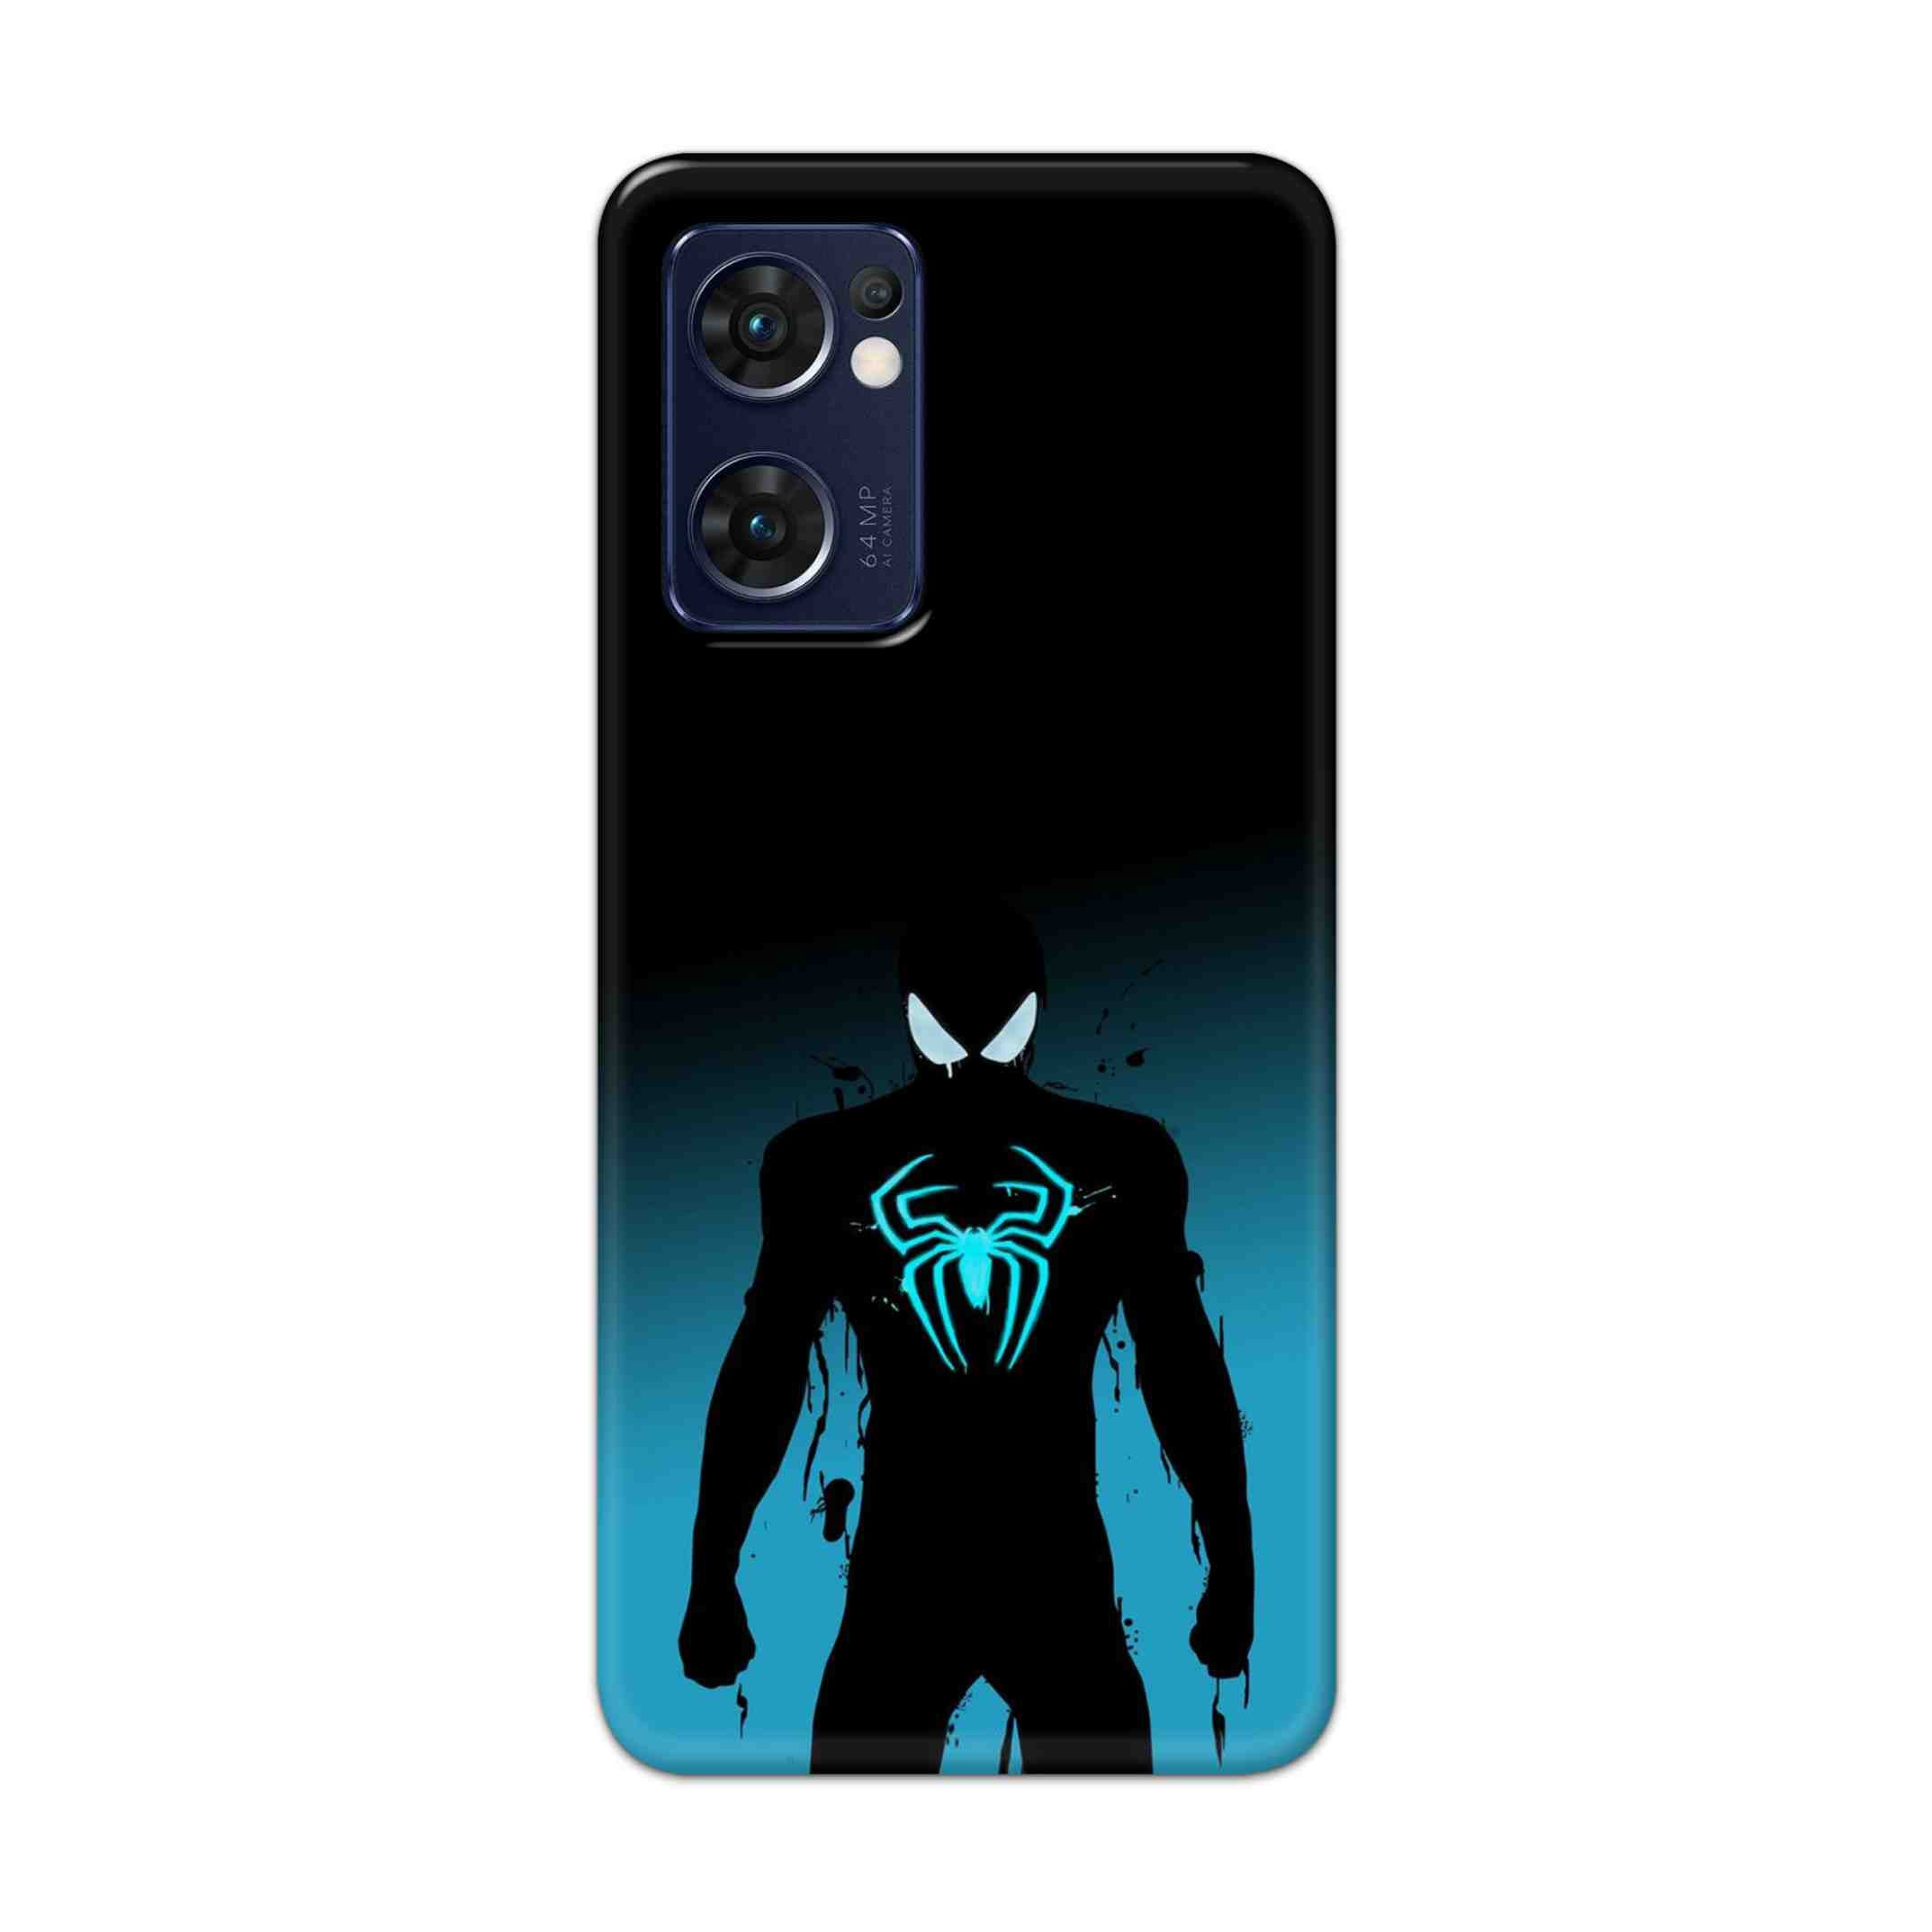 Buy Neon Spiderman Hard Back Mobile Phone Case Cover For Reno 7 5G Online